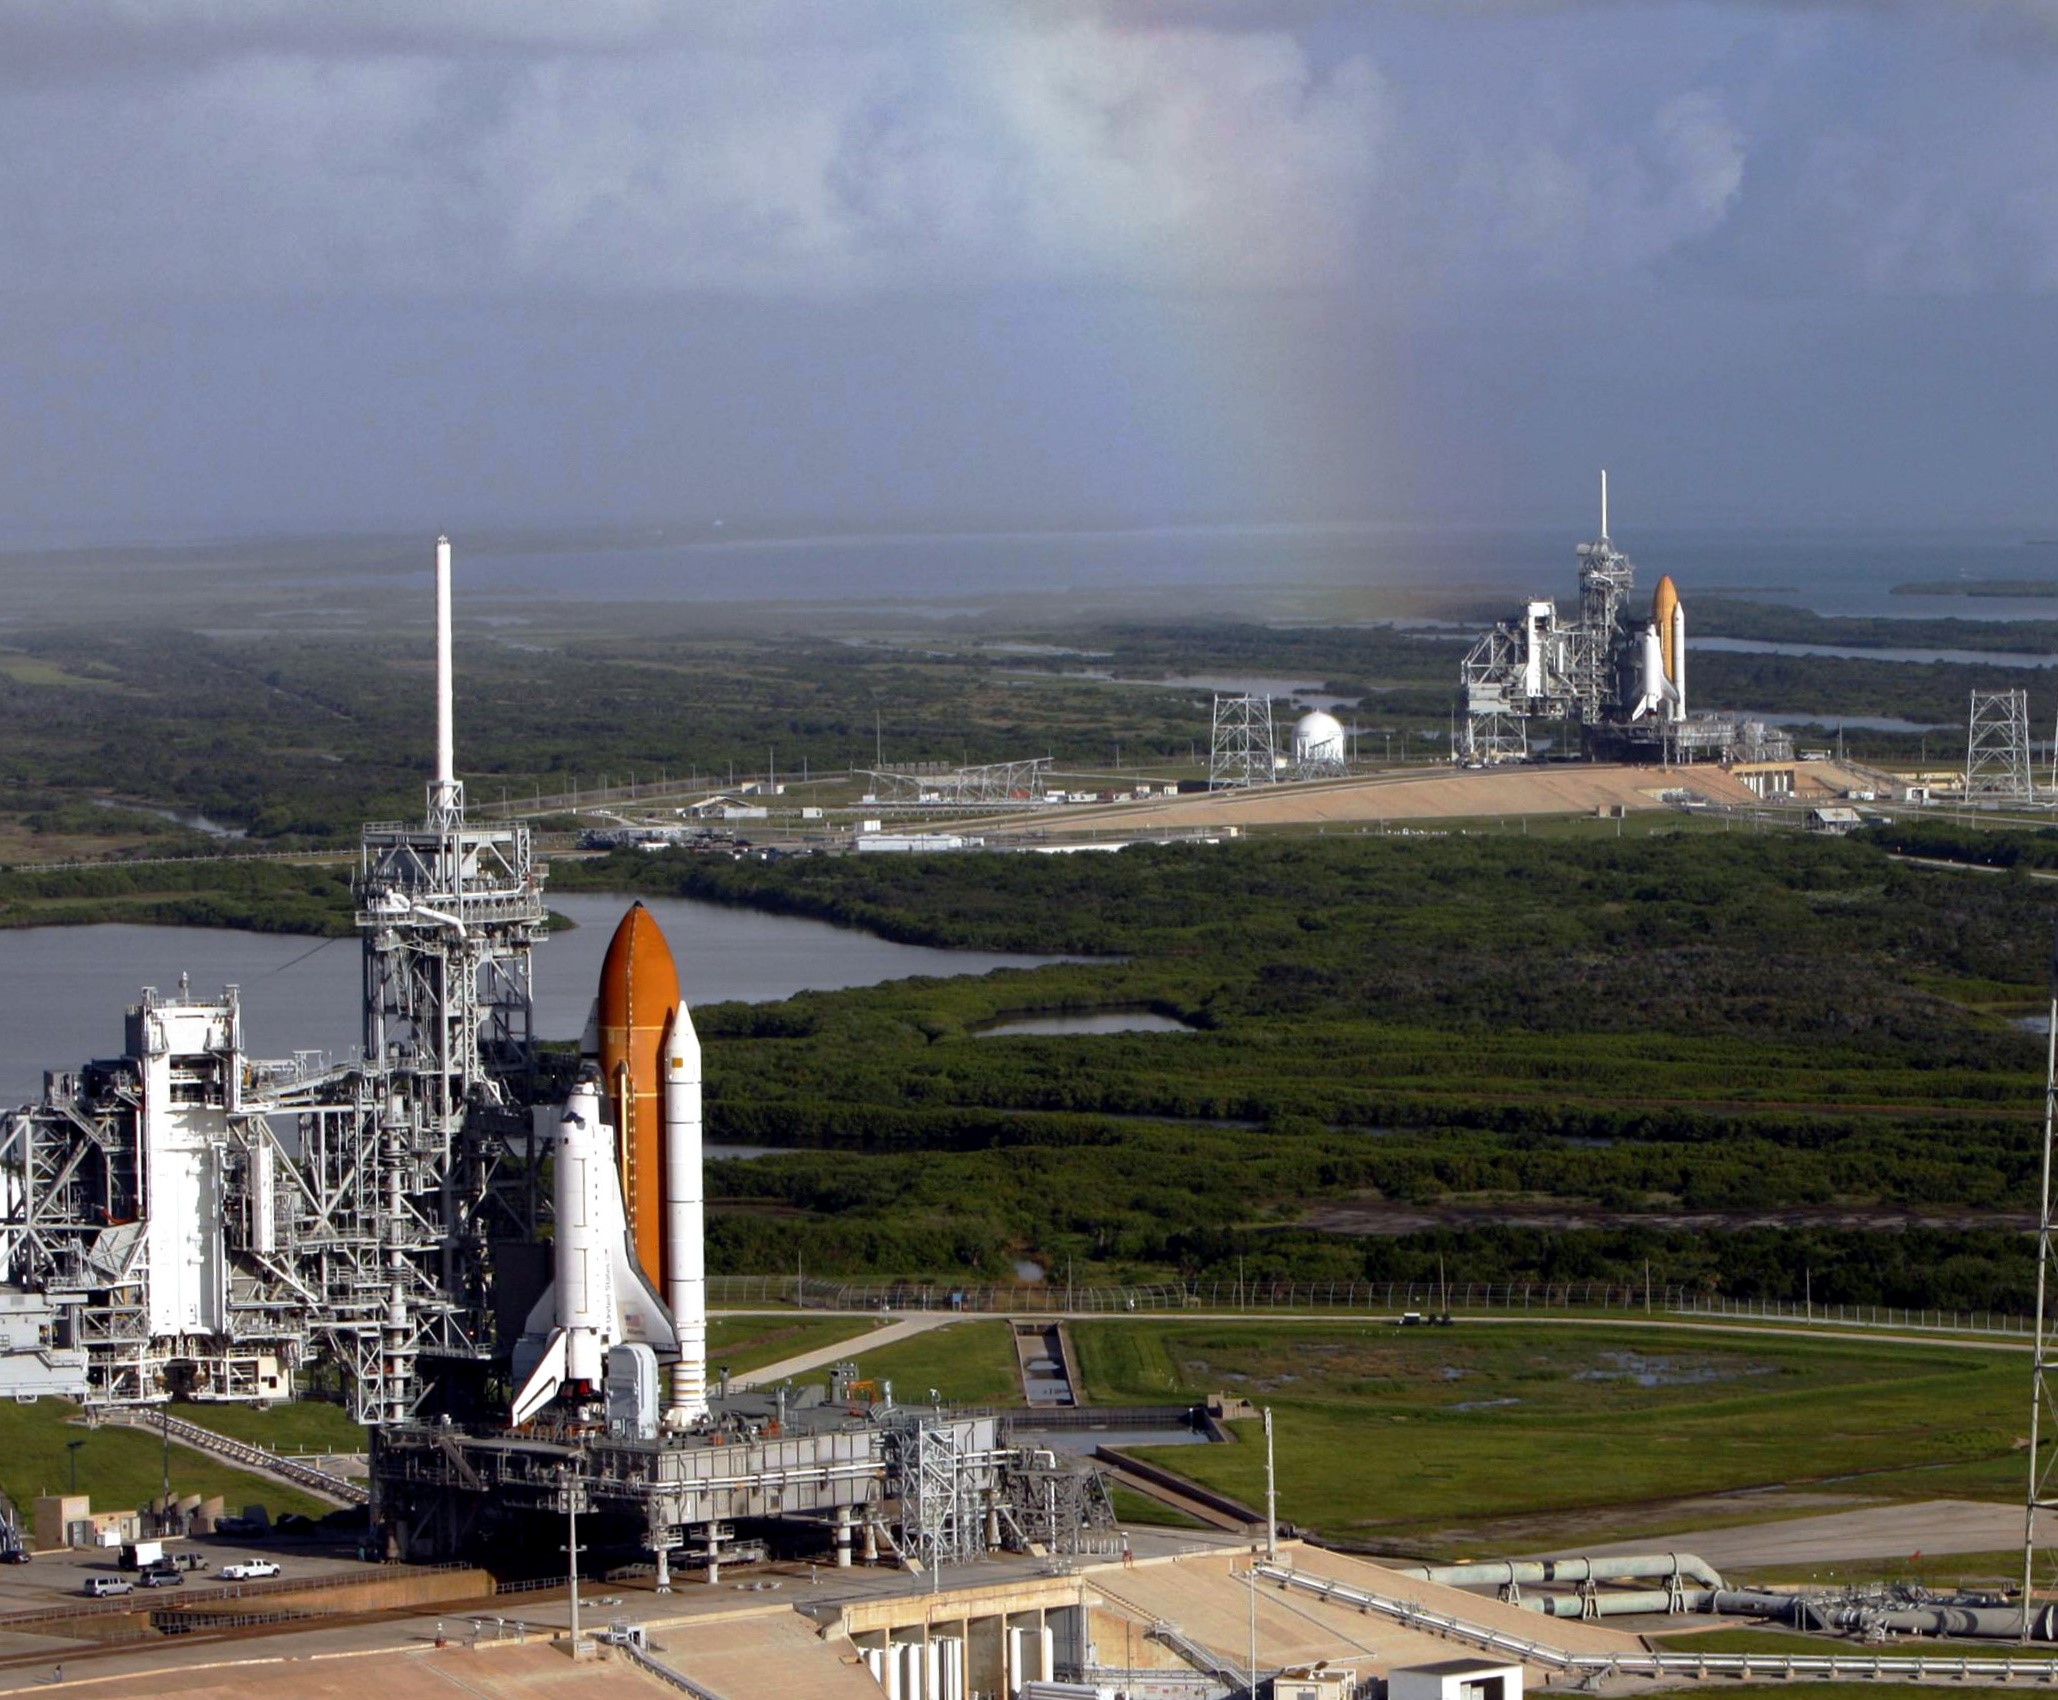 Shuttles on two pads for the first launch attempt, Atlantis on Pad 39A, left, and Endeavour on Pad 39B